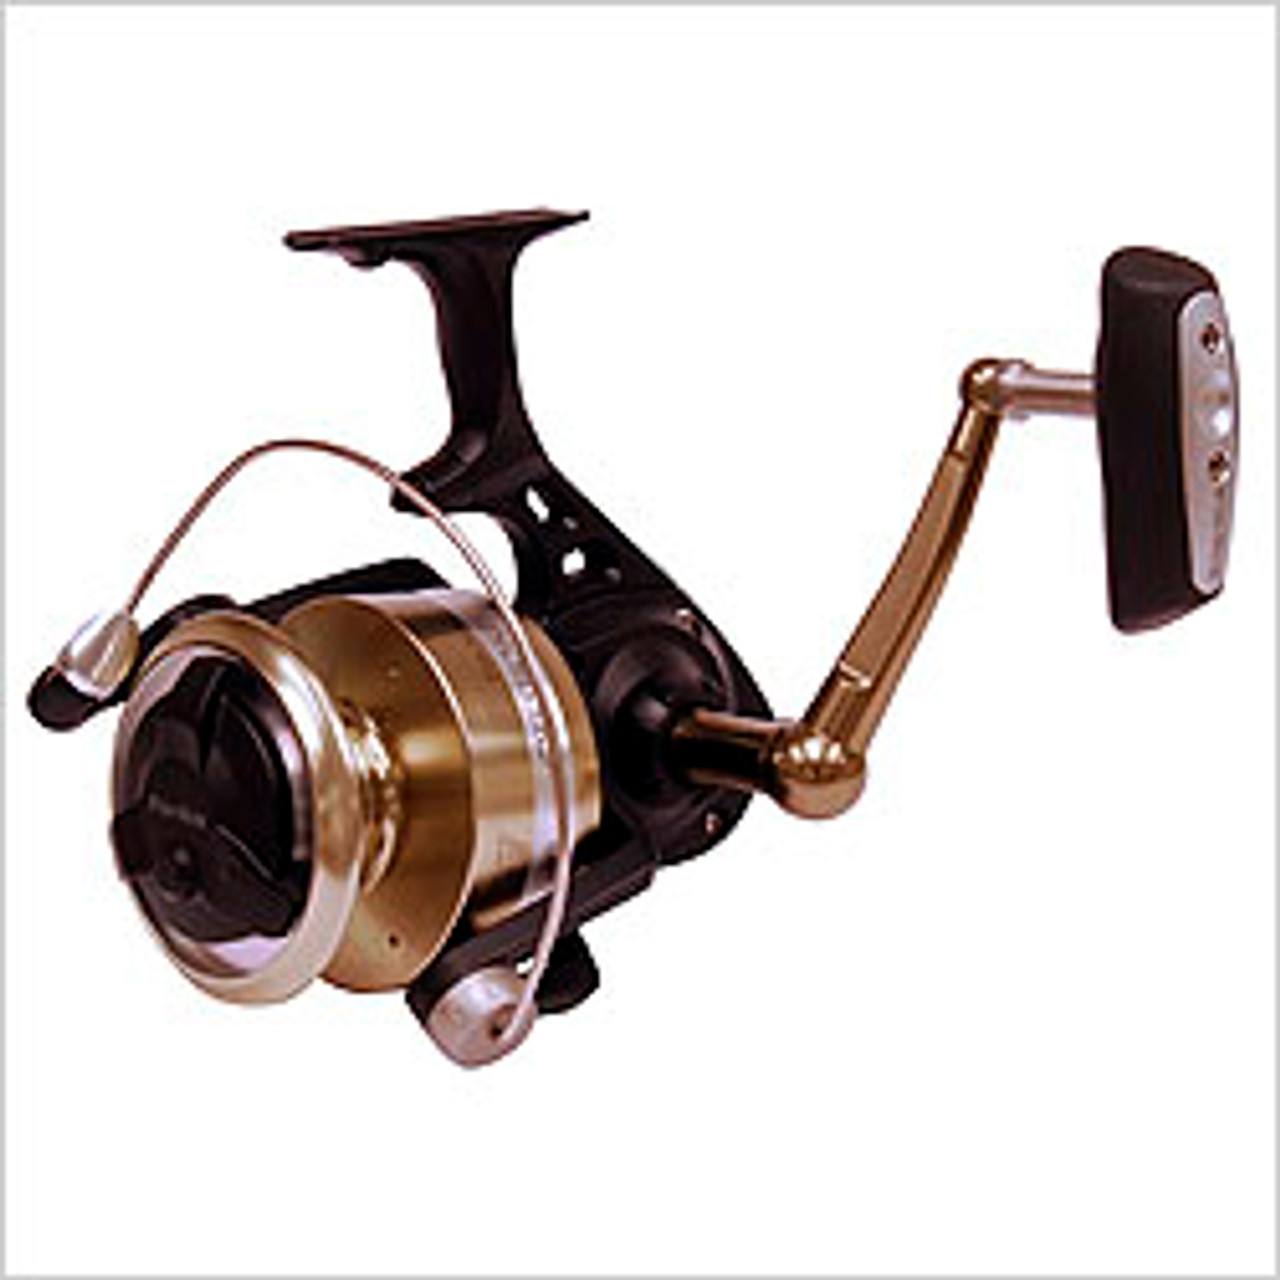 Fin Nor Offshore Spinning Reel 65 - 575 yds. / 12 lb.